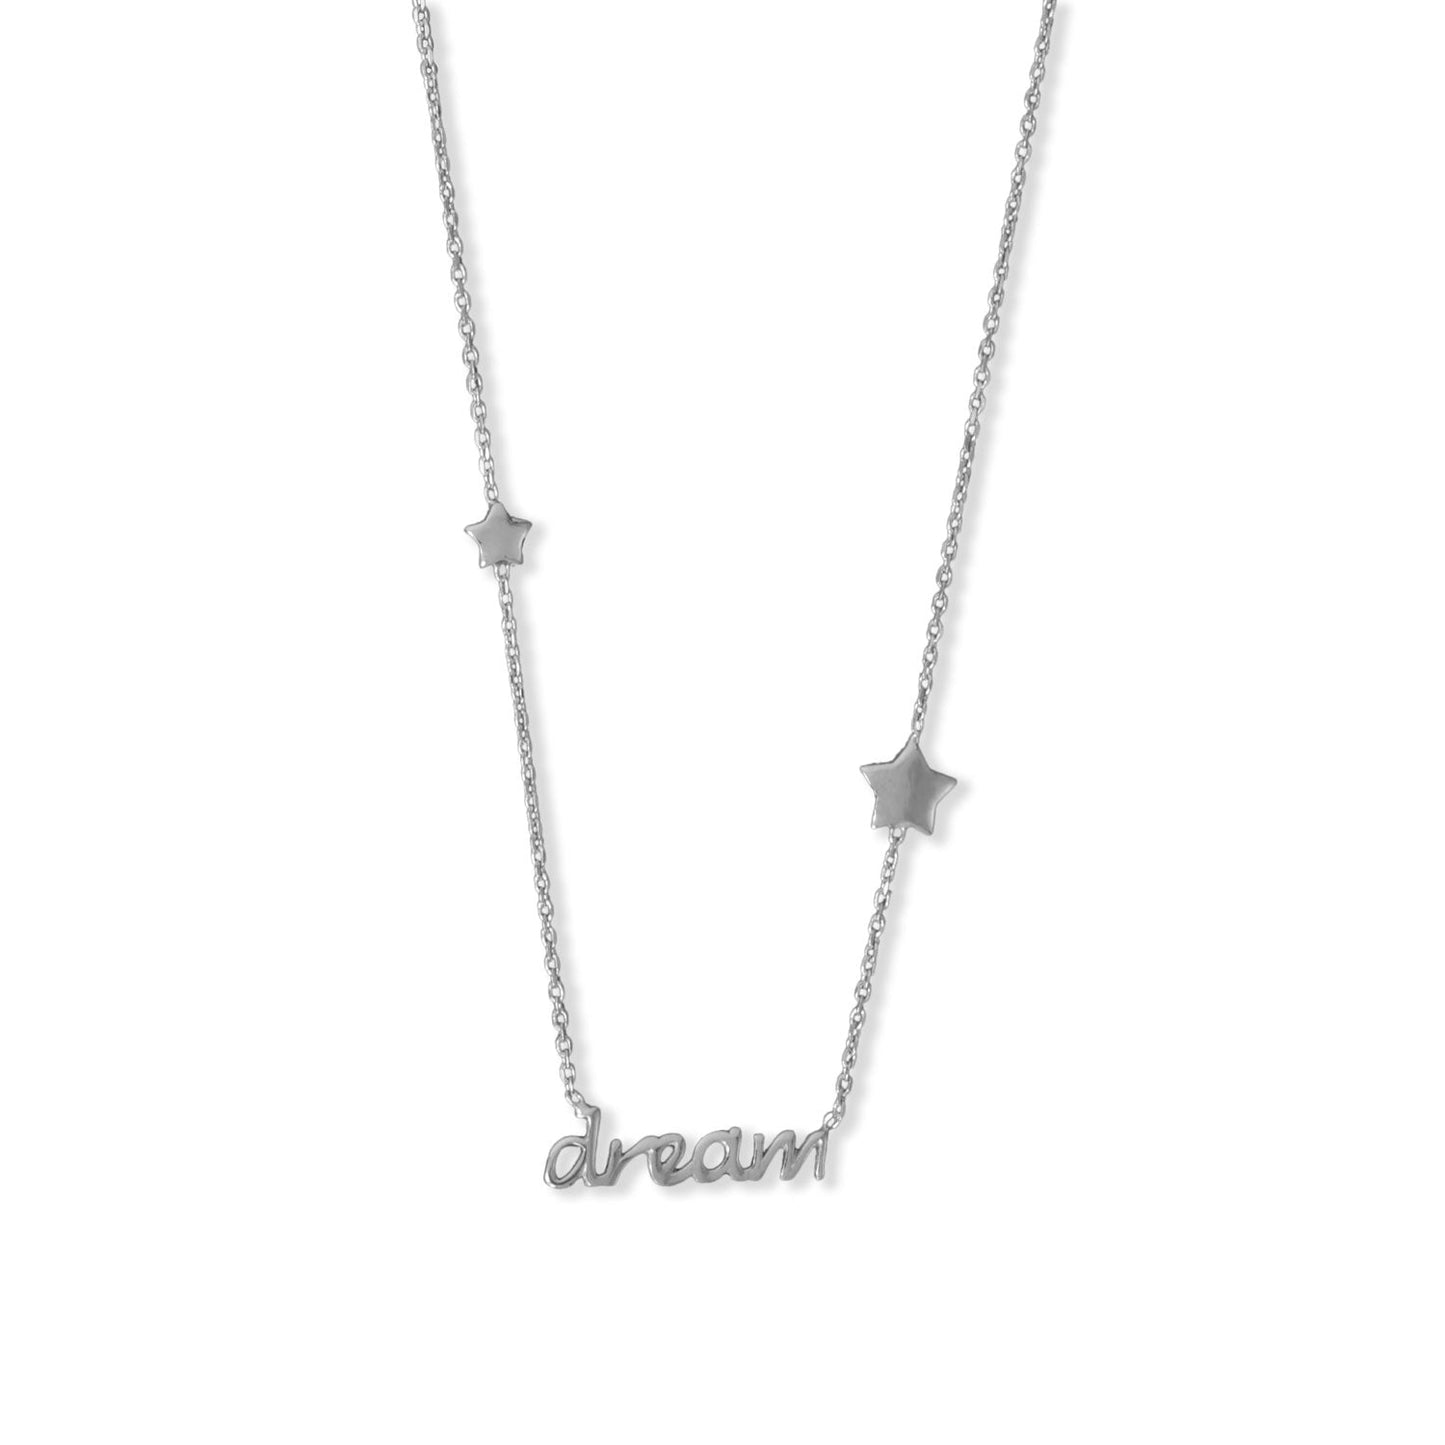 16" + 2" Rhodium Plated "Dream" and Stars Necklace